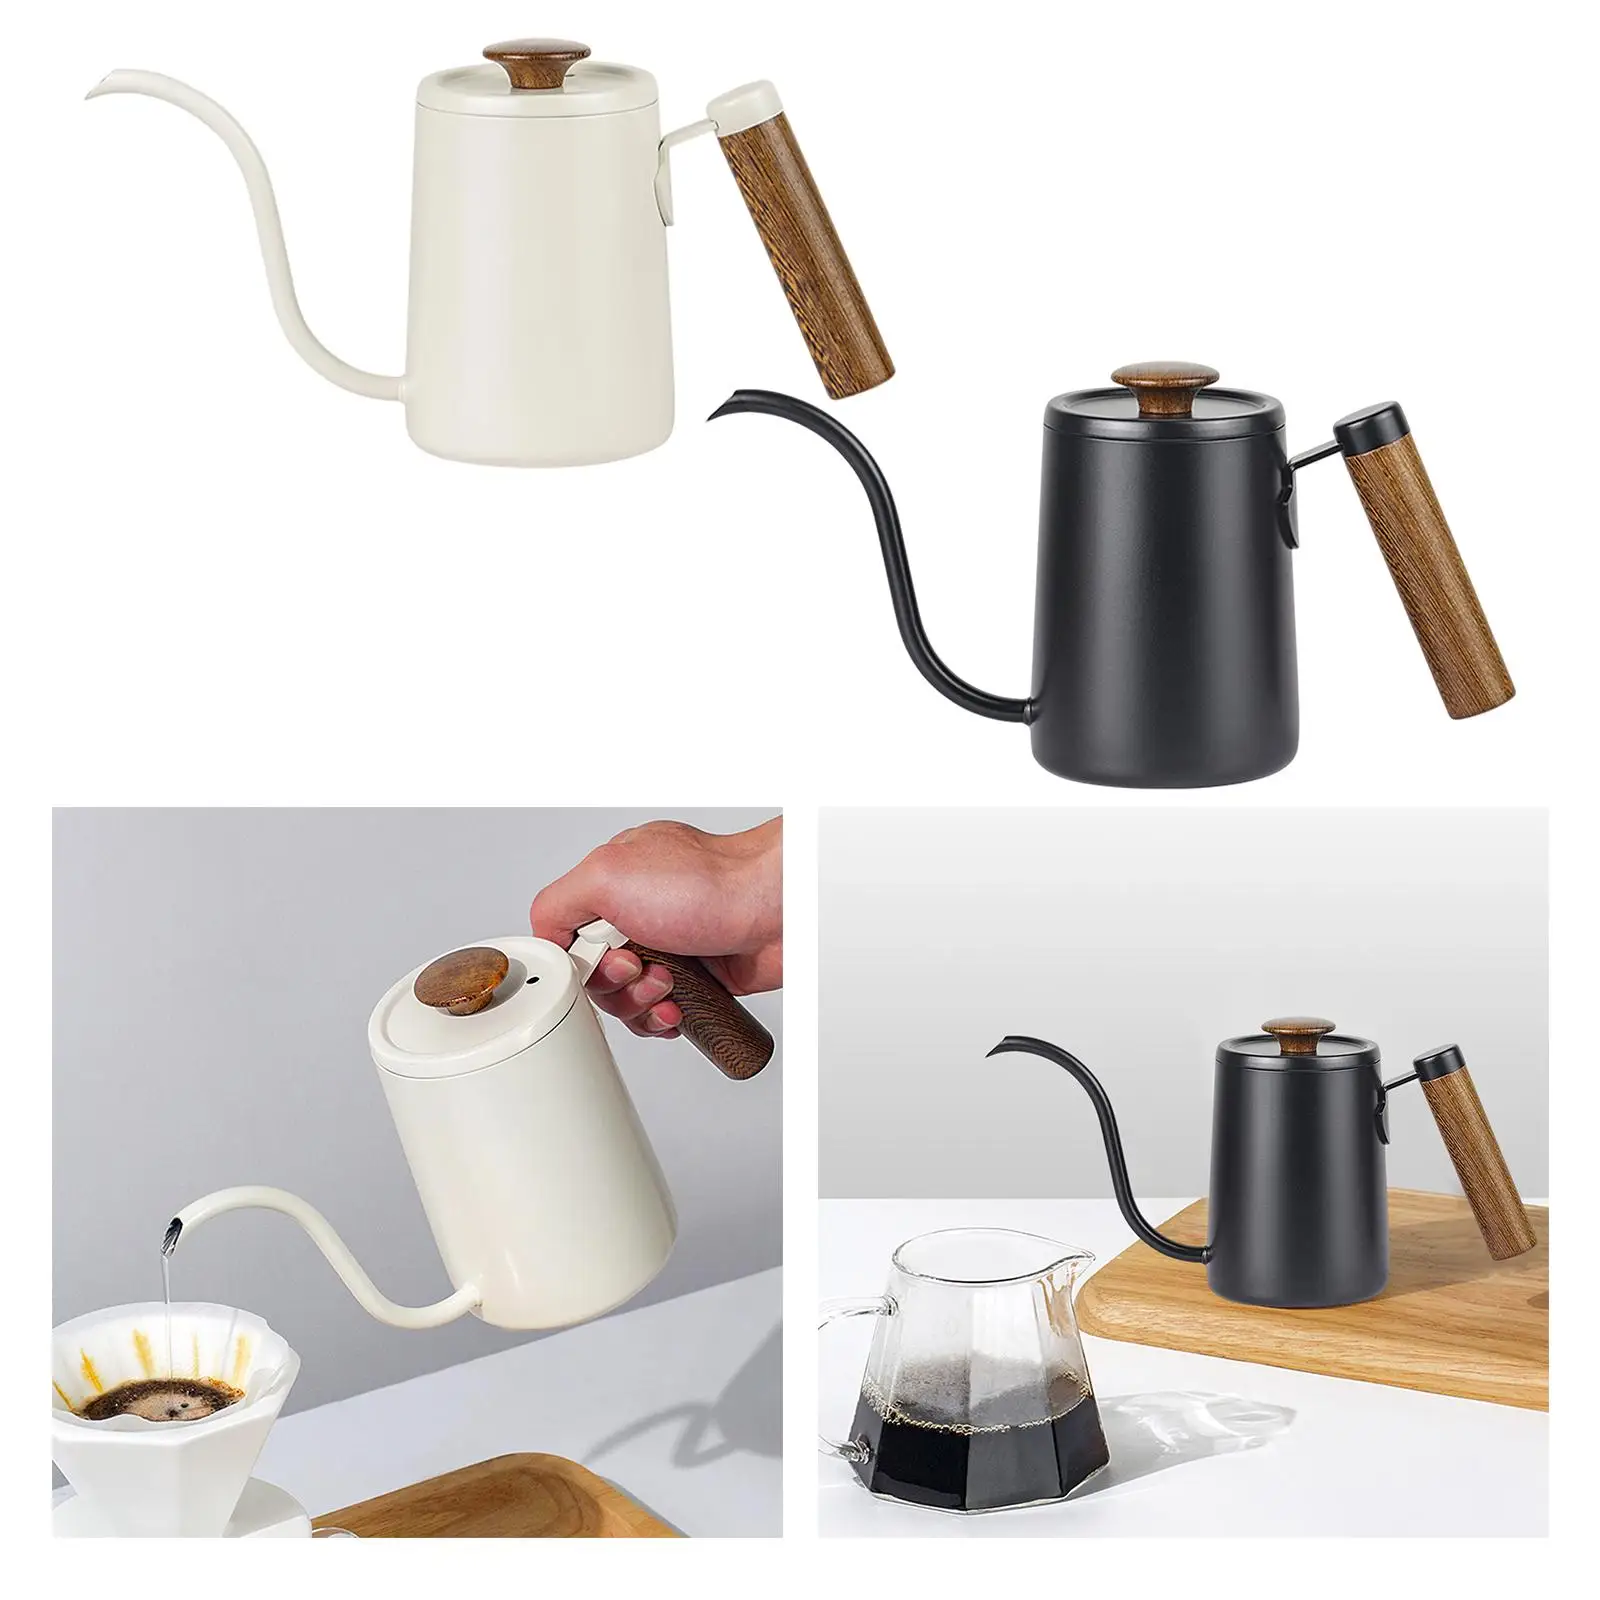 Pour over Coffee Kettle Precision Drip Stainless Steel Tea Kettle Coffee Tea Pot for Maker Kitchen Home